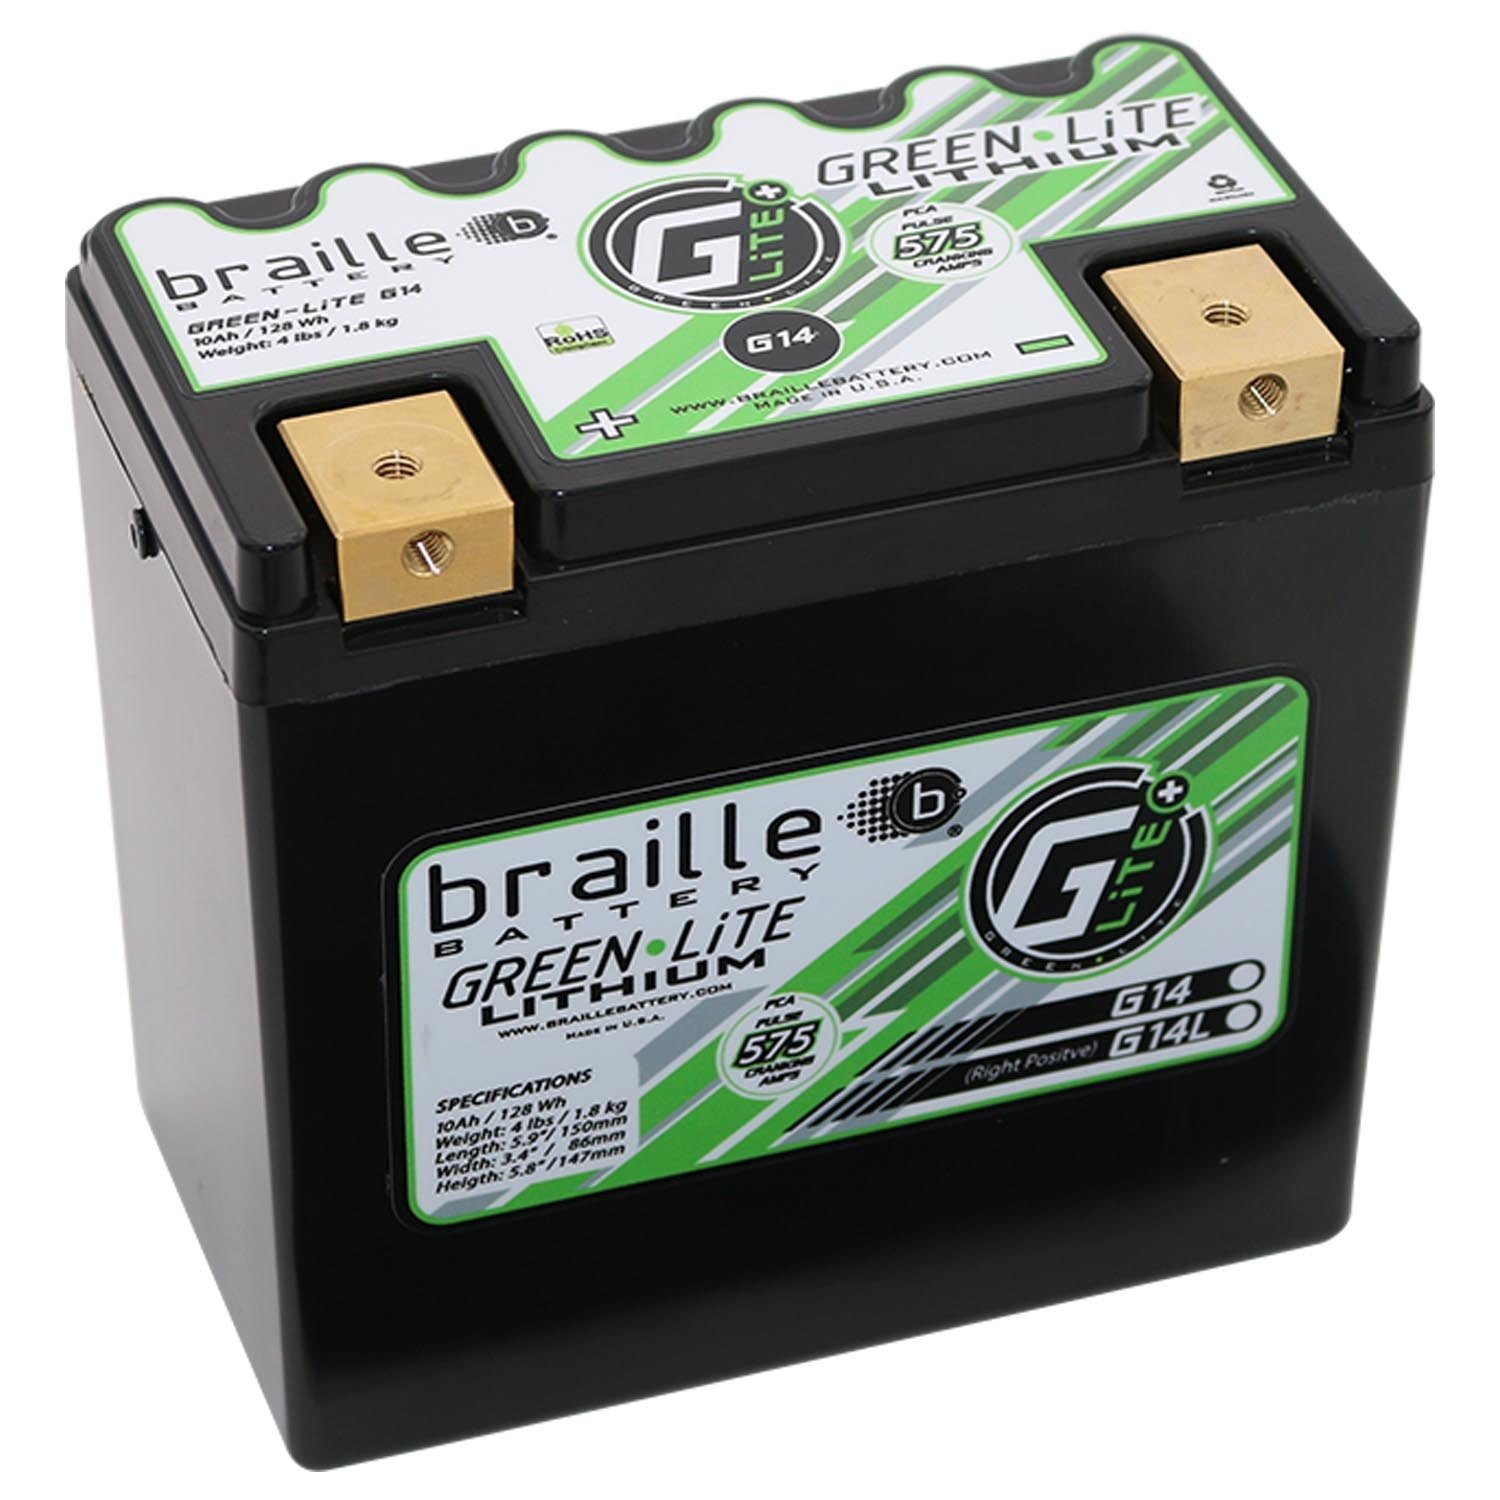 G14LS Green-Lite Lithium-Ion 12 V Powersports Battery, BCI Group: 14, Pulse Cranking Amps (PCA): 697 - Left Side Positive